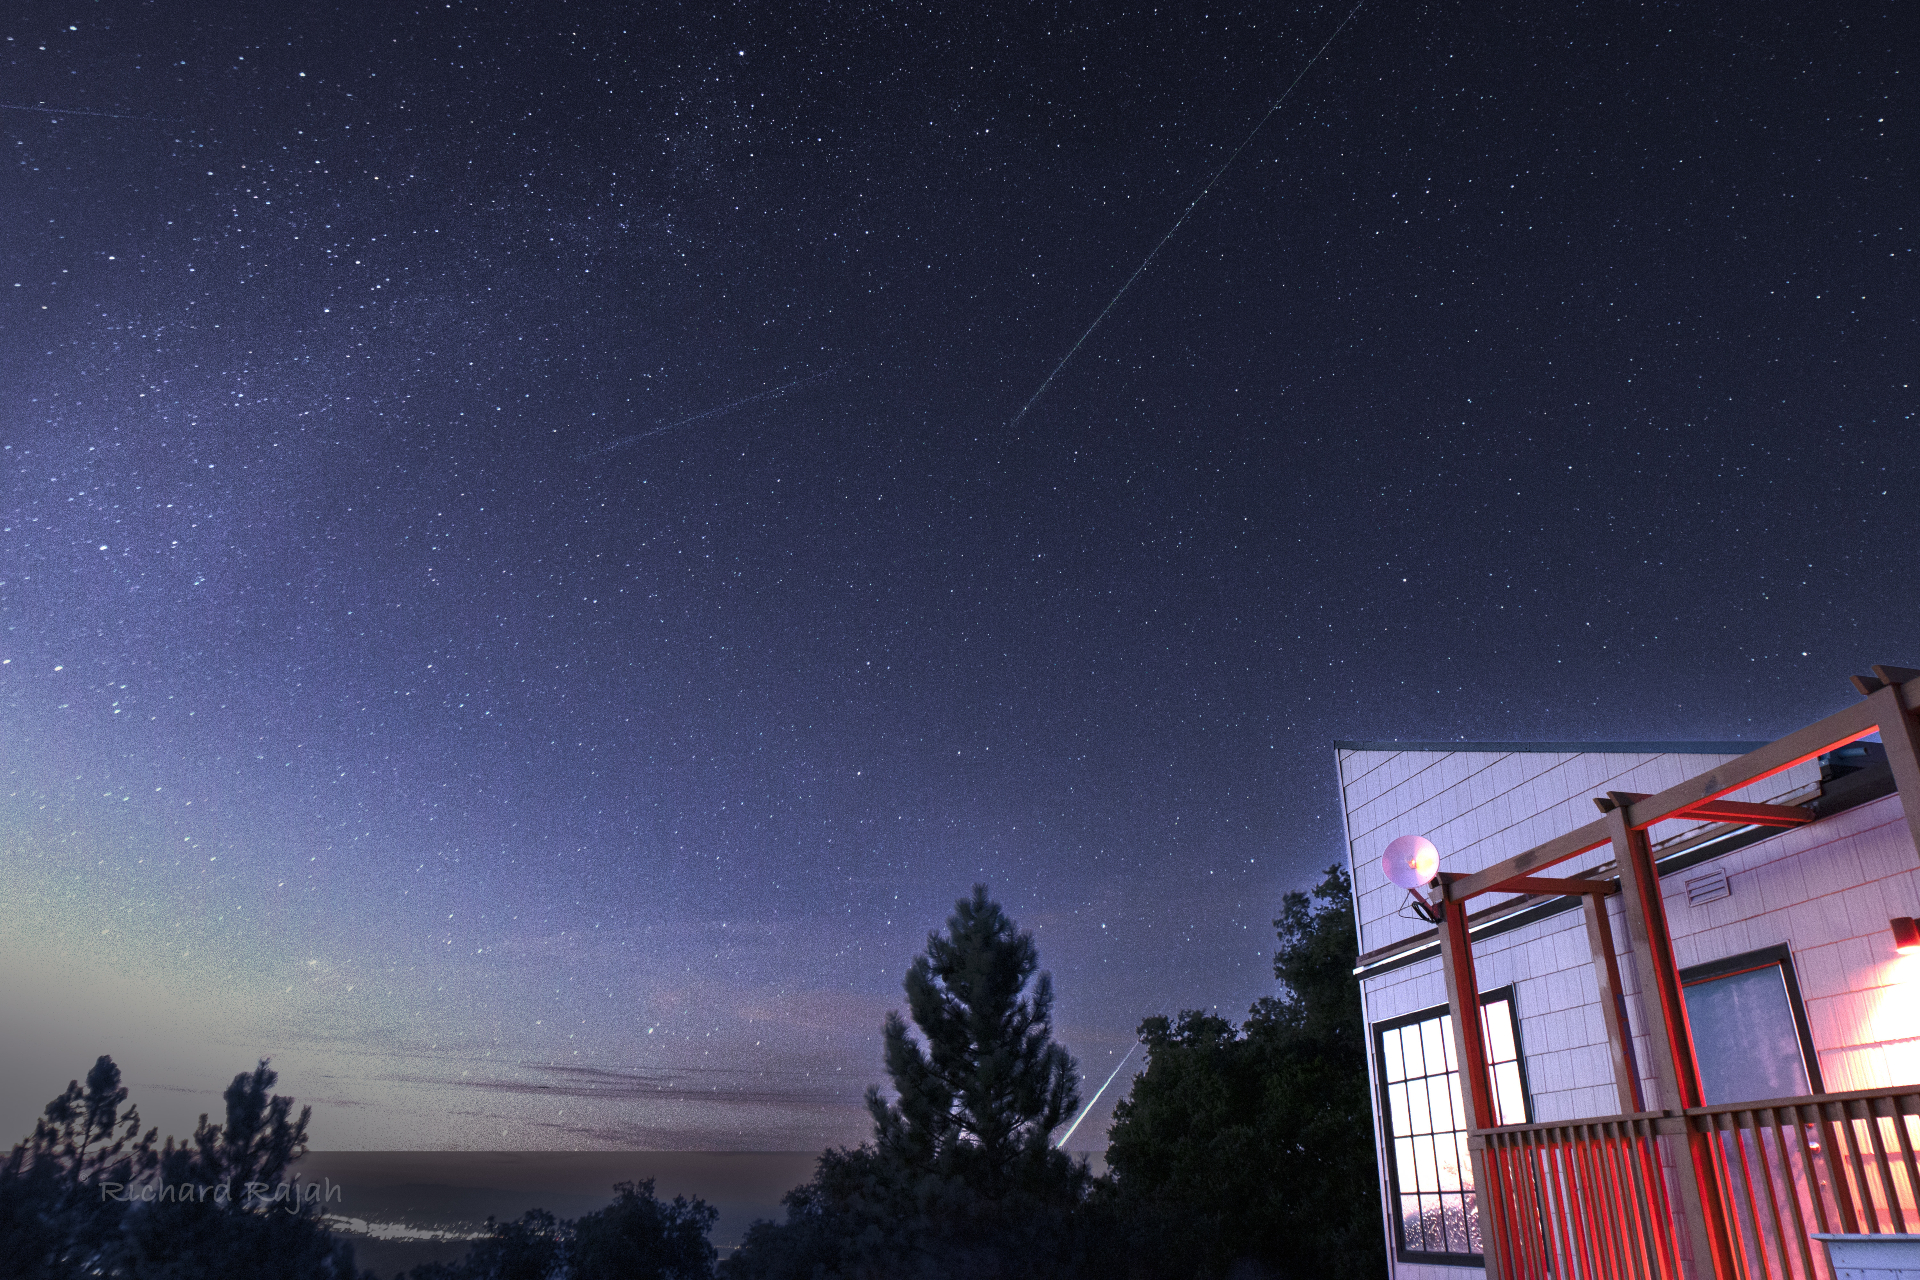 Perseid meteors dot the sky and a bright torch trails behind the trees in the lower part of the image.  A building is illuminated on the right of the image.